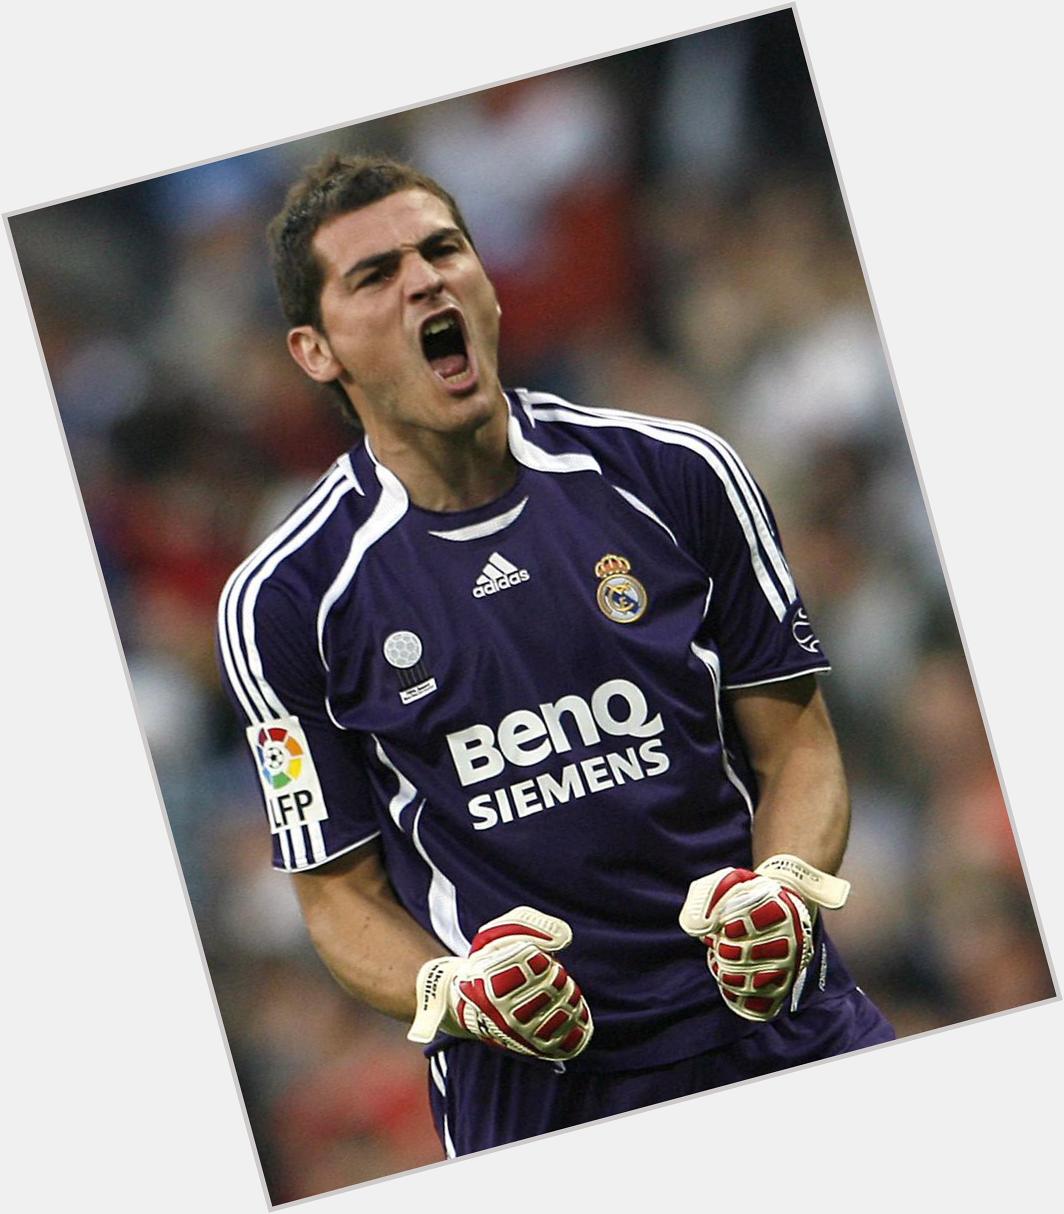 Happy 34th Birthday to Iker Casillas, an amazing true legend of Real Madrid and the Spanish national team! 